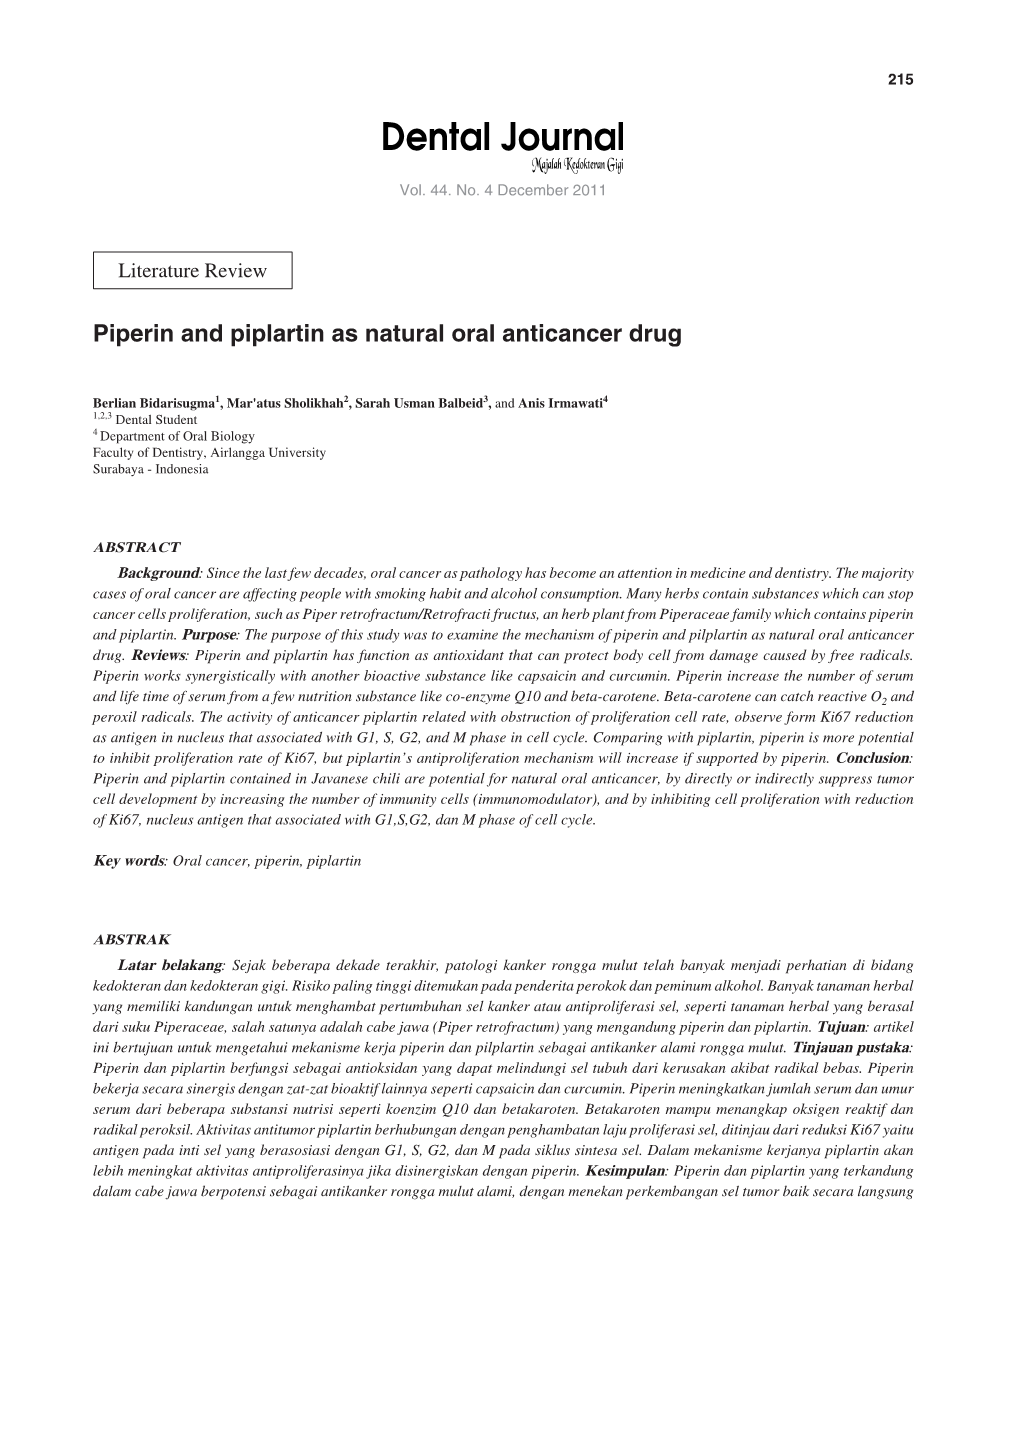 Piperin and Piplartin As Natural Oral Anticancer Drug